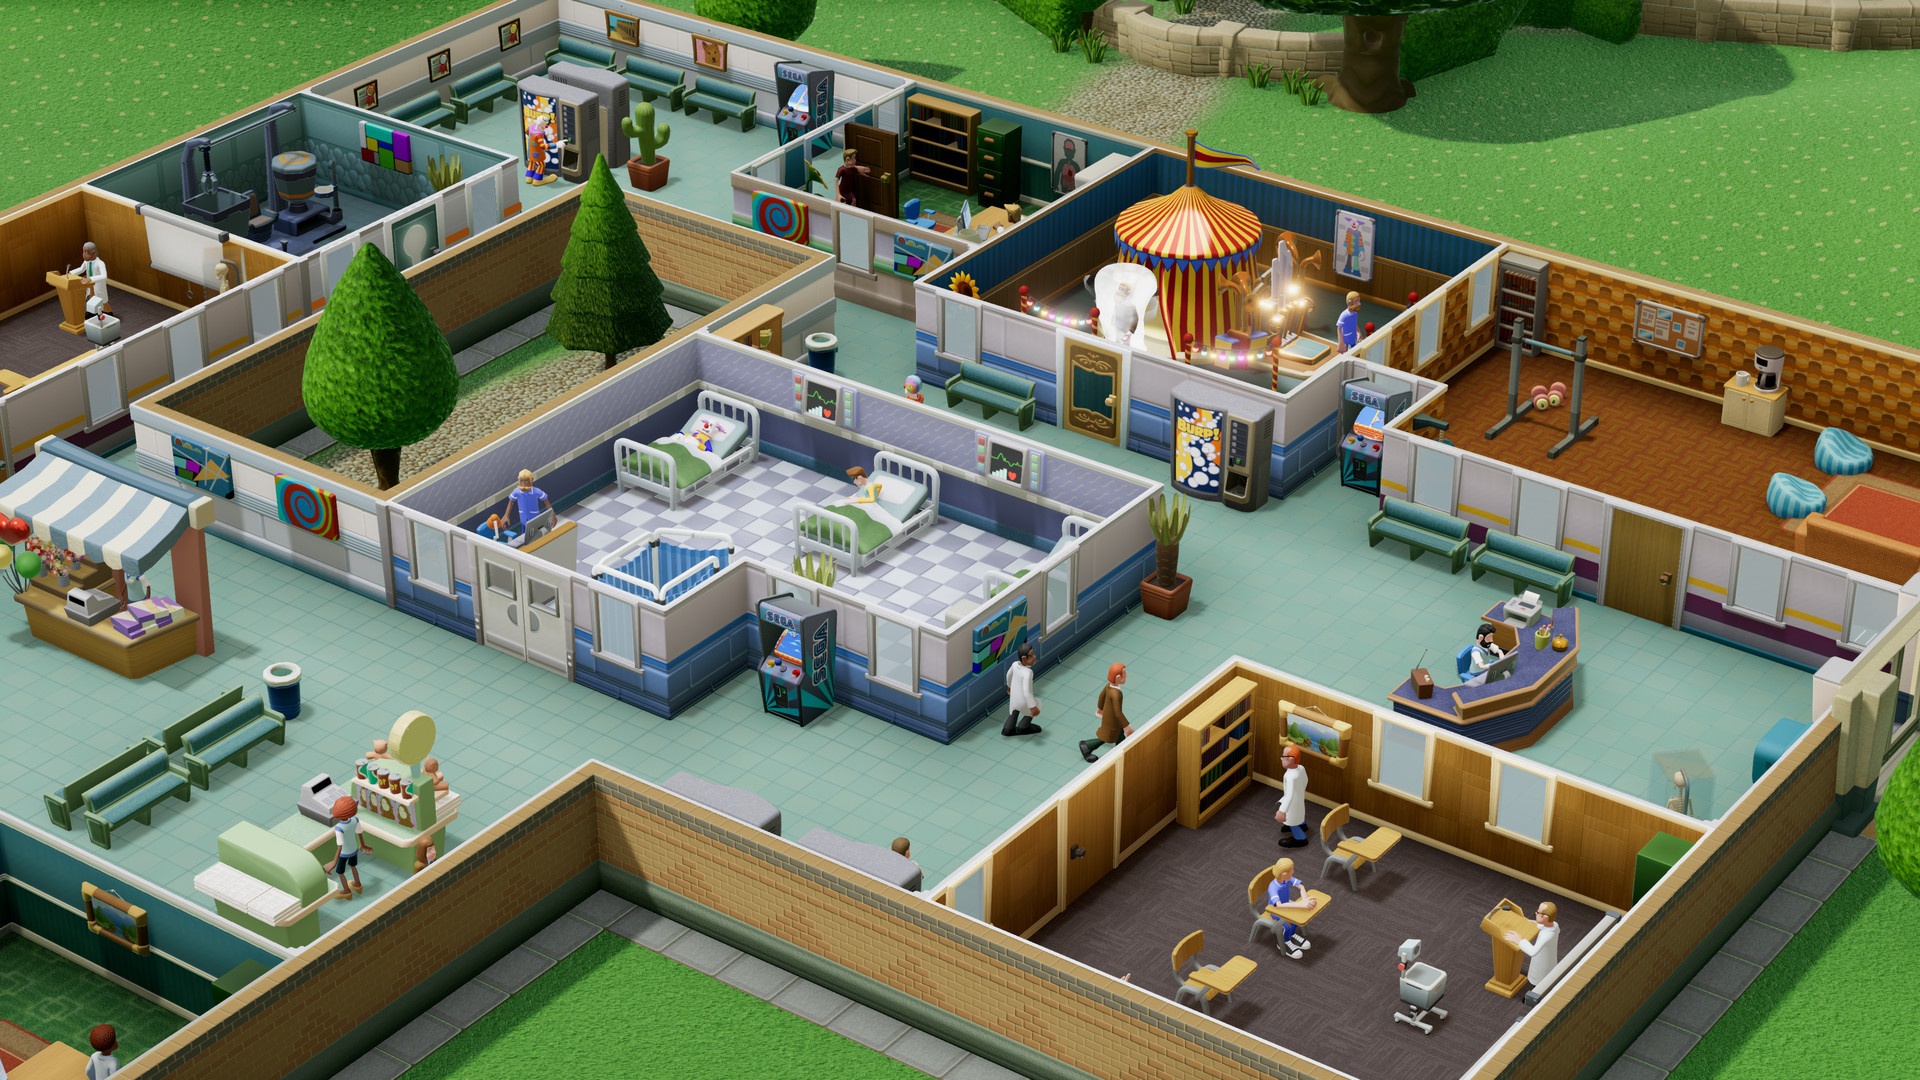 Two Point Hospital Wallpapers